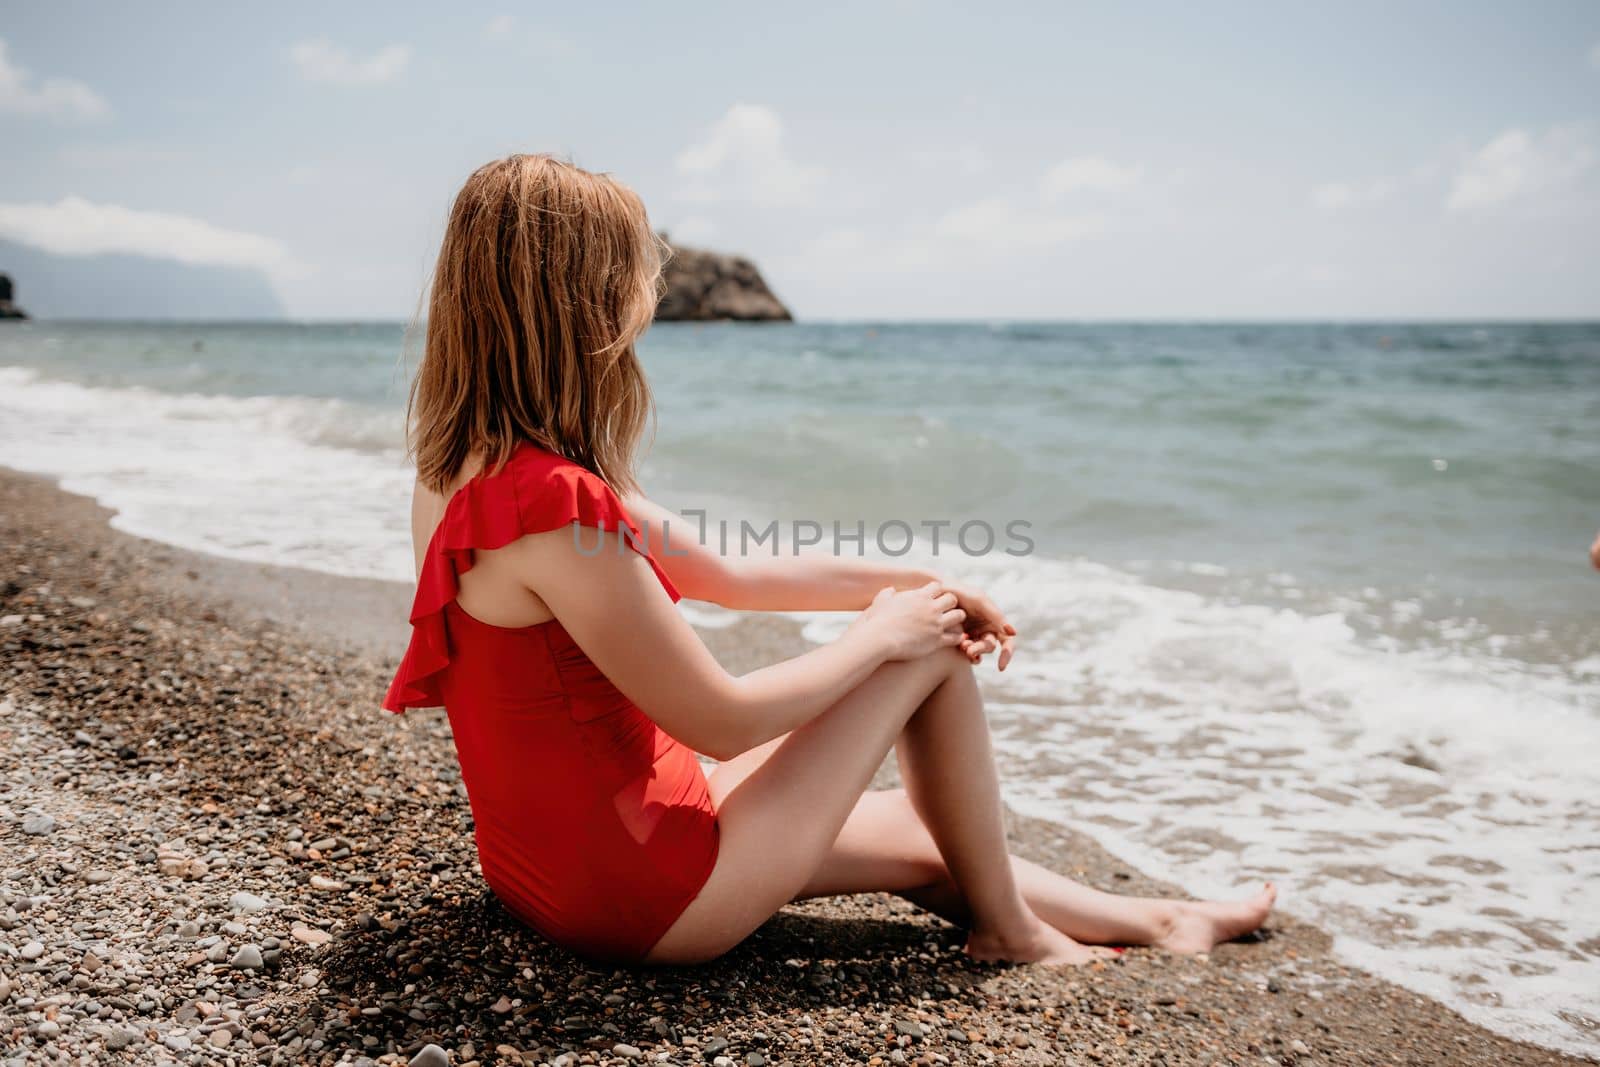 Young woman in red bikini on Beach. Blonde in sunglasses on pebble beach enjoying sun. Happy lady in one piece red swimsuit relaxing and sunbathing by turquoise sea ocean on hot summer day. Close up,